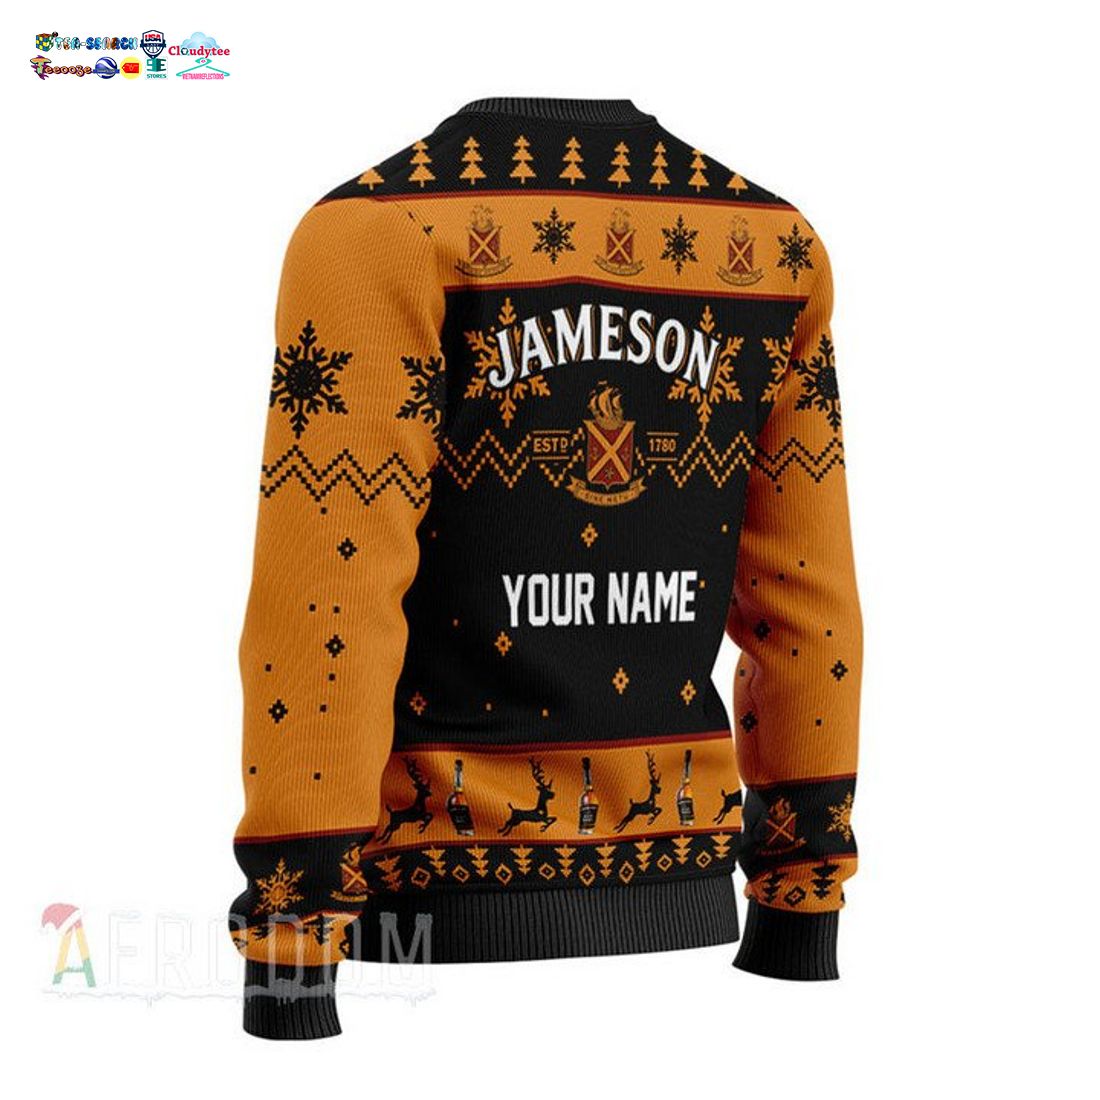 Personalized Name Jameson Black Barrel Ugly Christmas Sweater